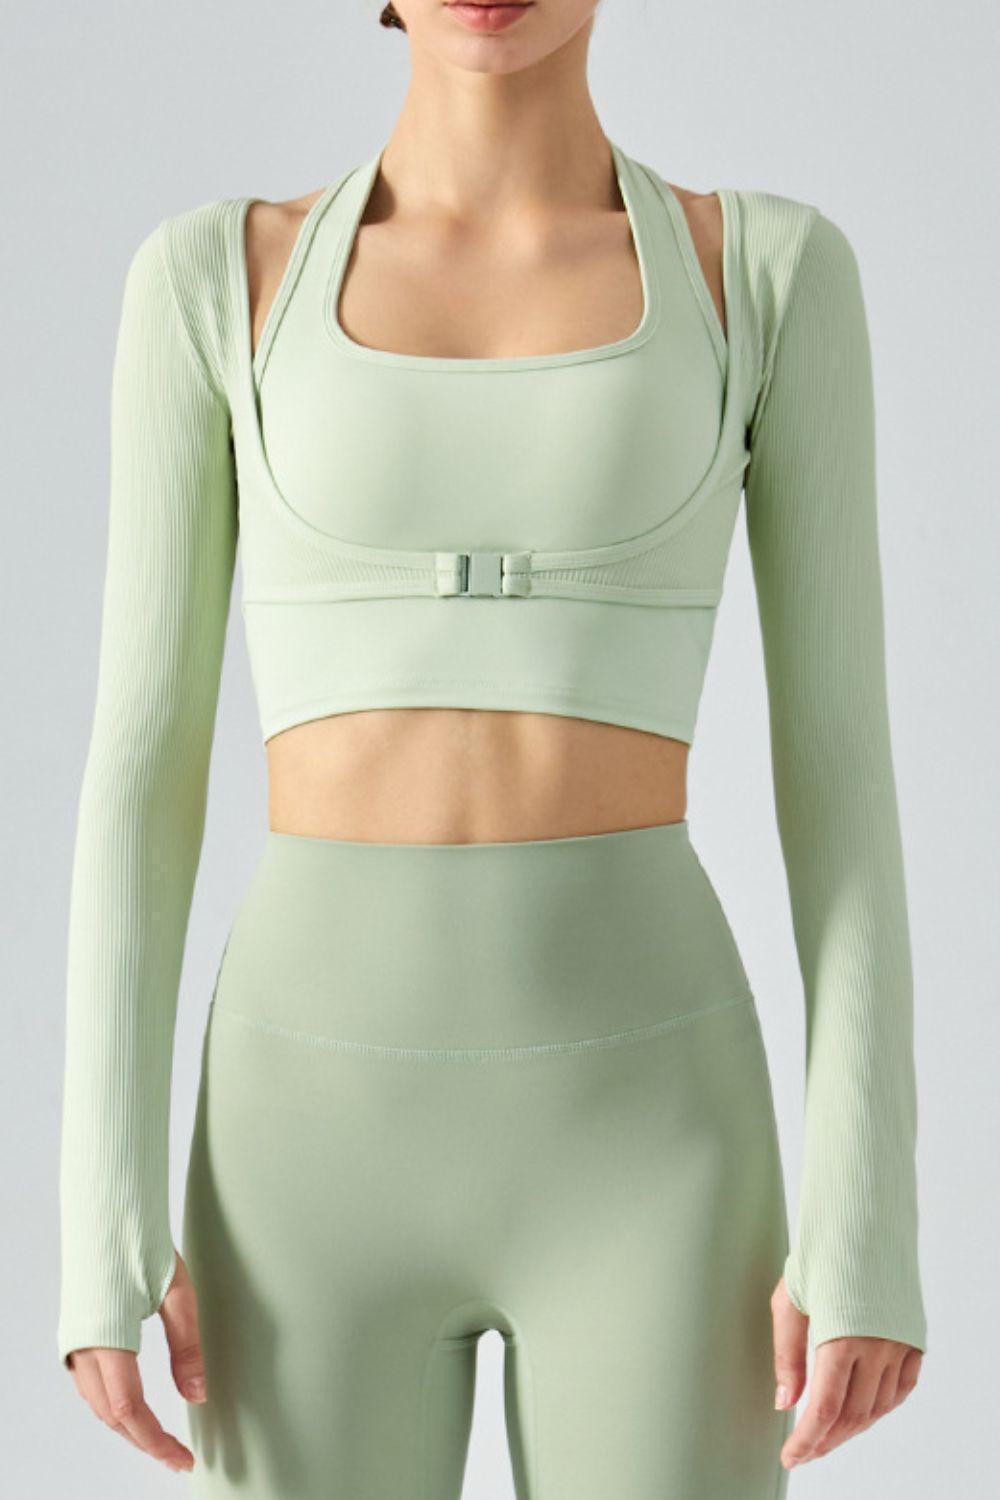 Halter Neck Ribbed Sports Top with Long Sleeves - MXSTUDIO.COM